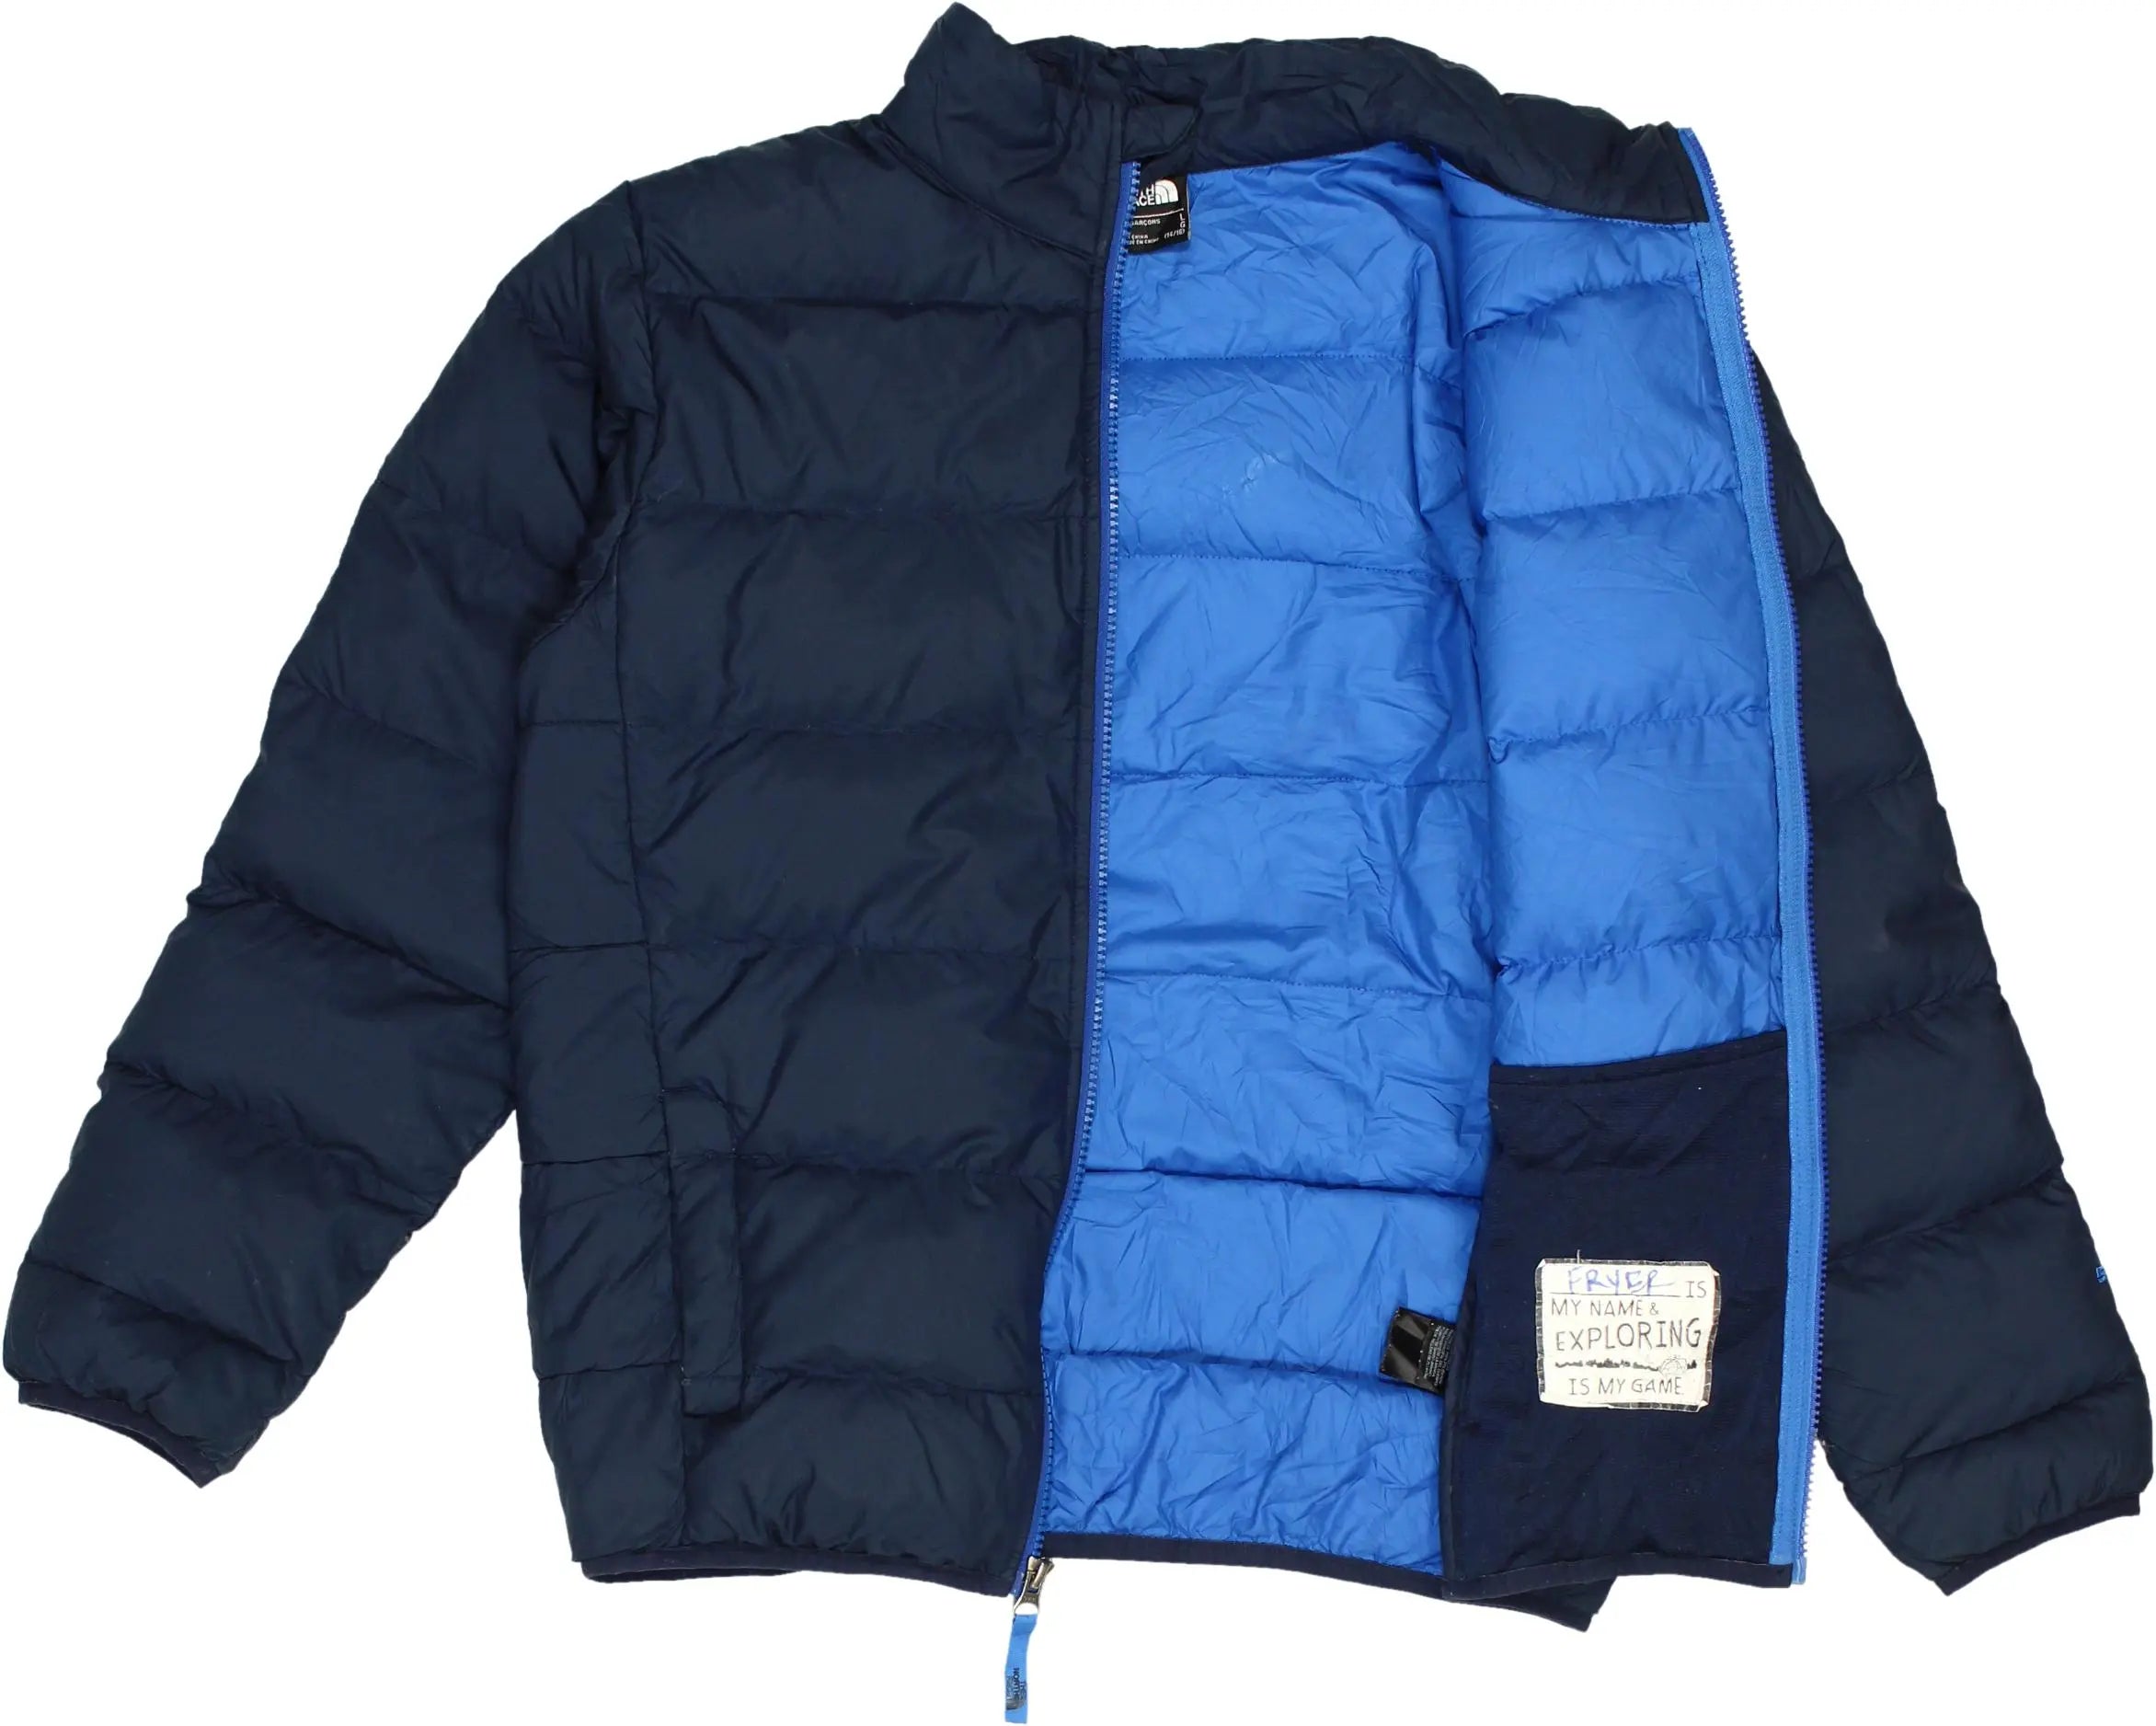 The North Face - Jacket by The North Face- ThriftTale.com - Vintage and second handclothing